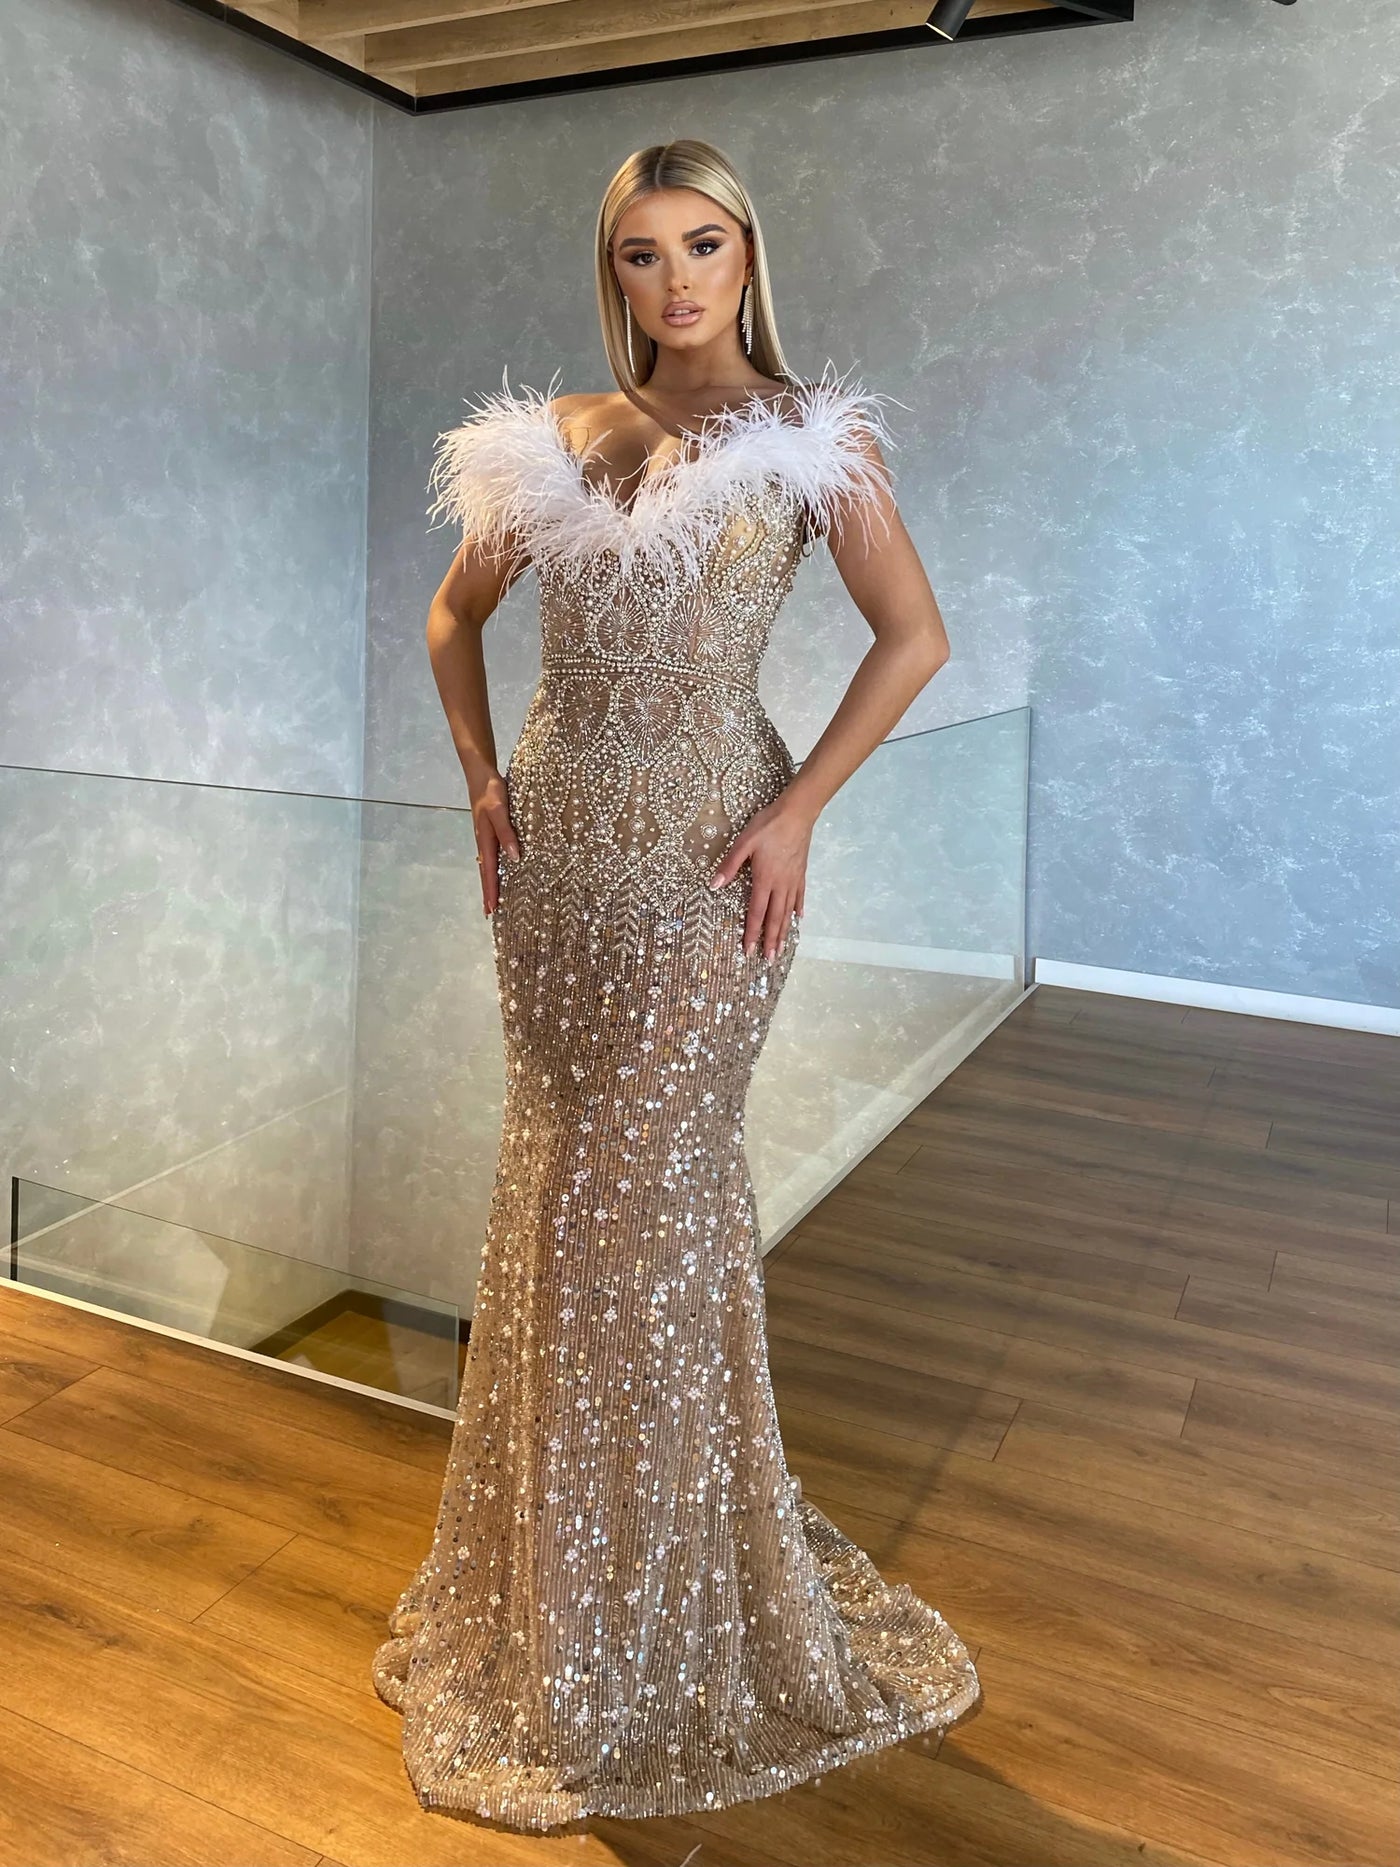 Aijingyu Glitter Wedding Dress Gowns With Sleeves Exotic Weddimg Sweden  Bridal London Gown Designs Long Frocks For Wedding - Wedding Dresses -  AliExpress